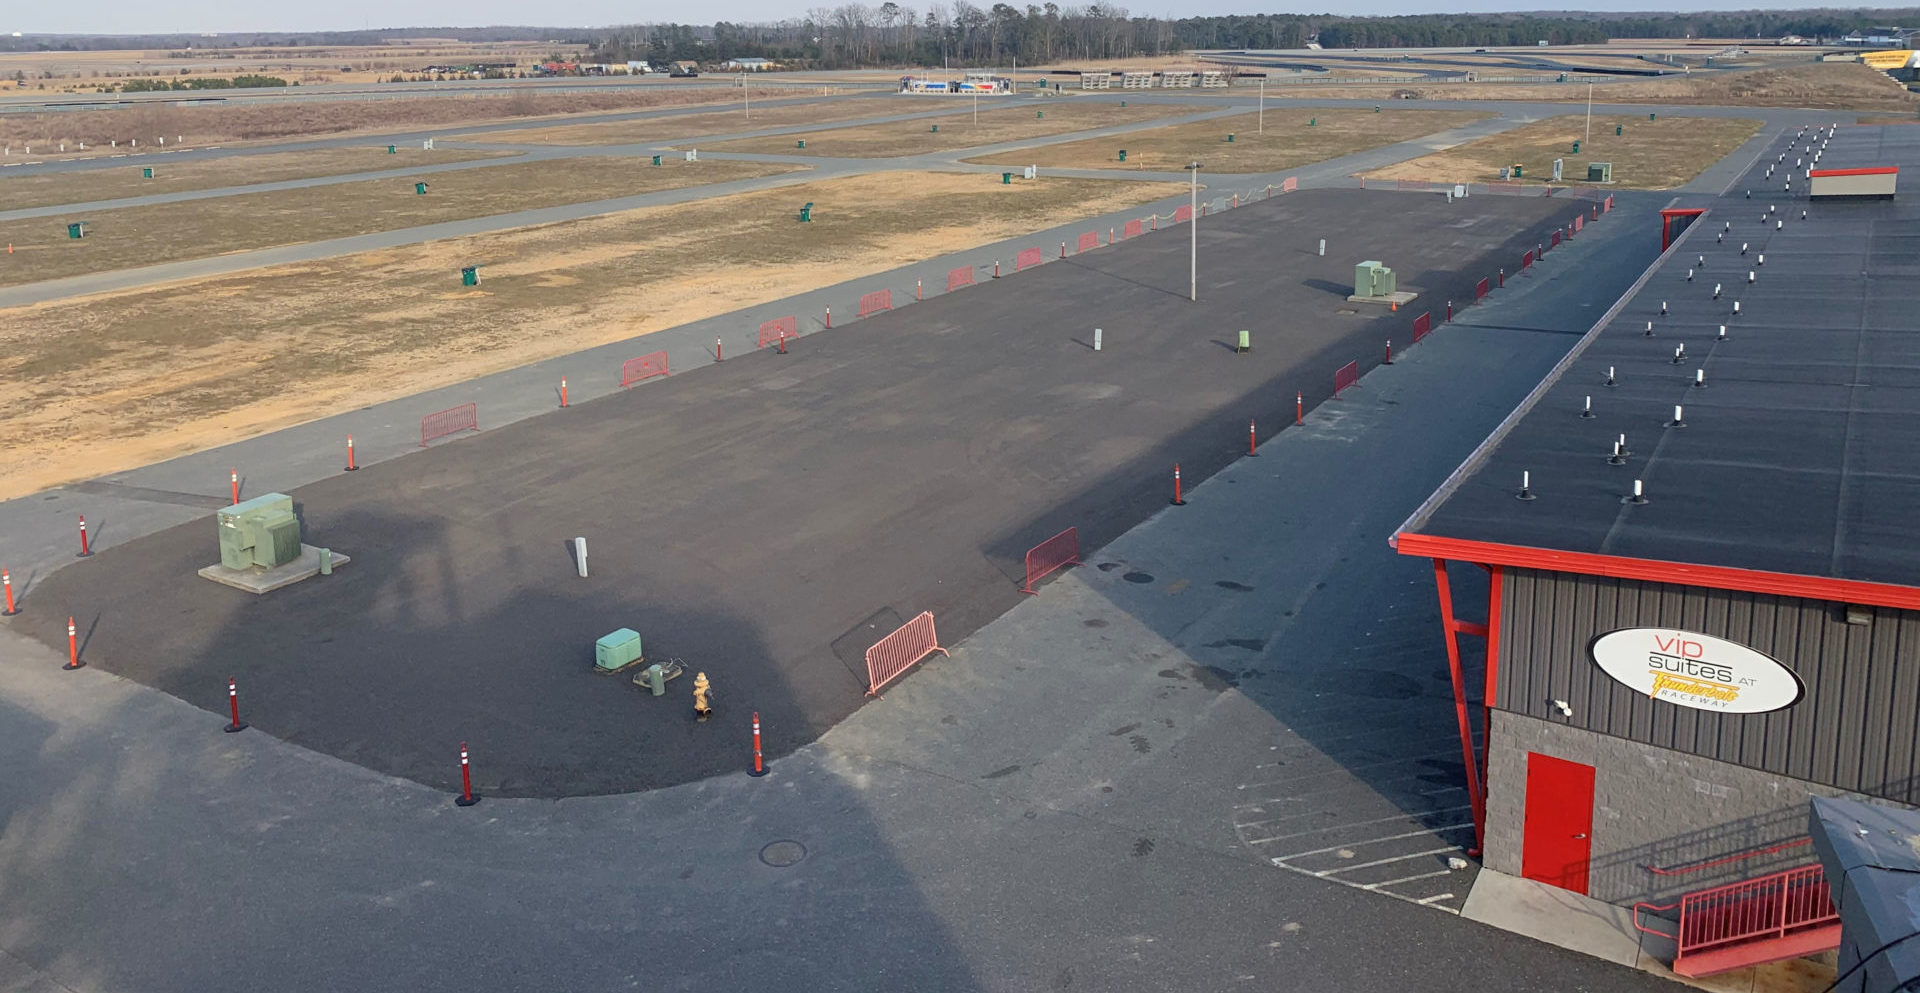 The grass area in front of the garages at New Jersey Motorsports Park's Thunderbolt Raceway have been paved. Photo courtesy New Jersey Motorsports Park.